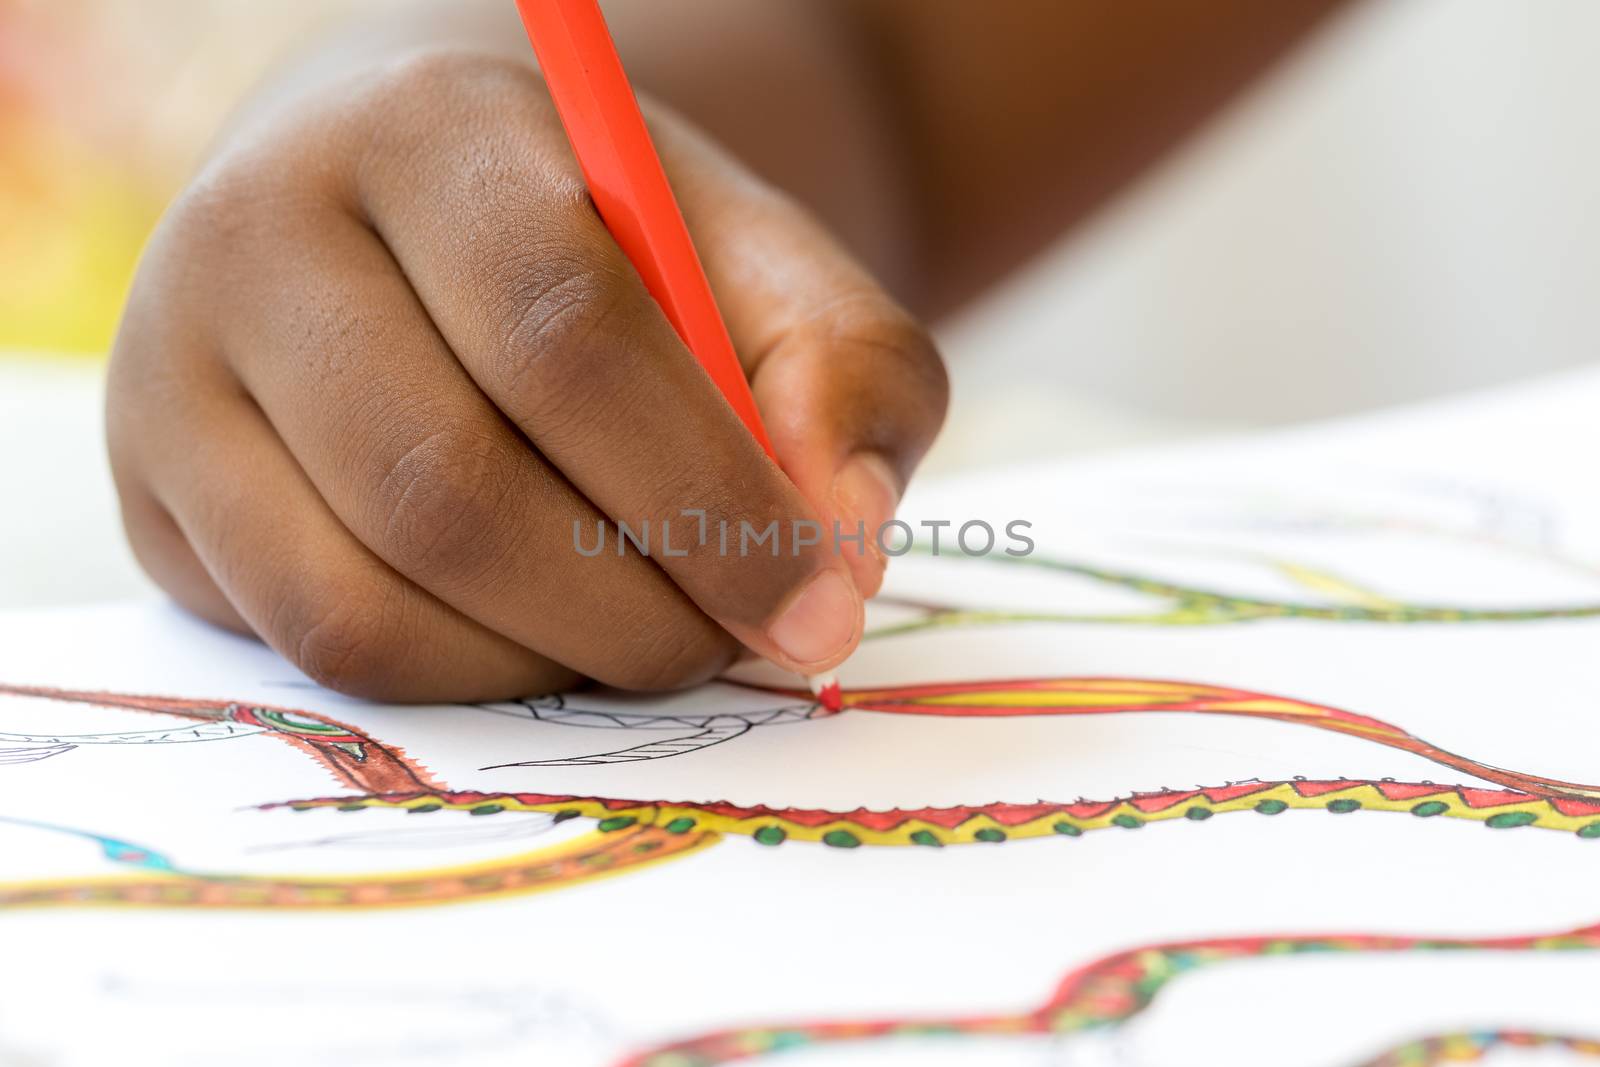 Macro close up detail of african hand drawing on paper.Child creating colorful art work with pencils.